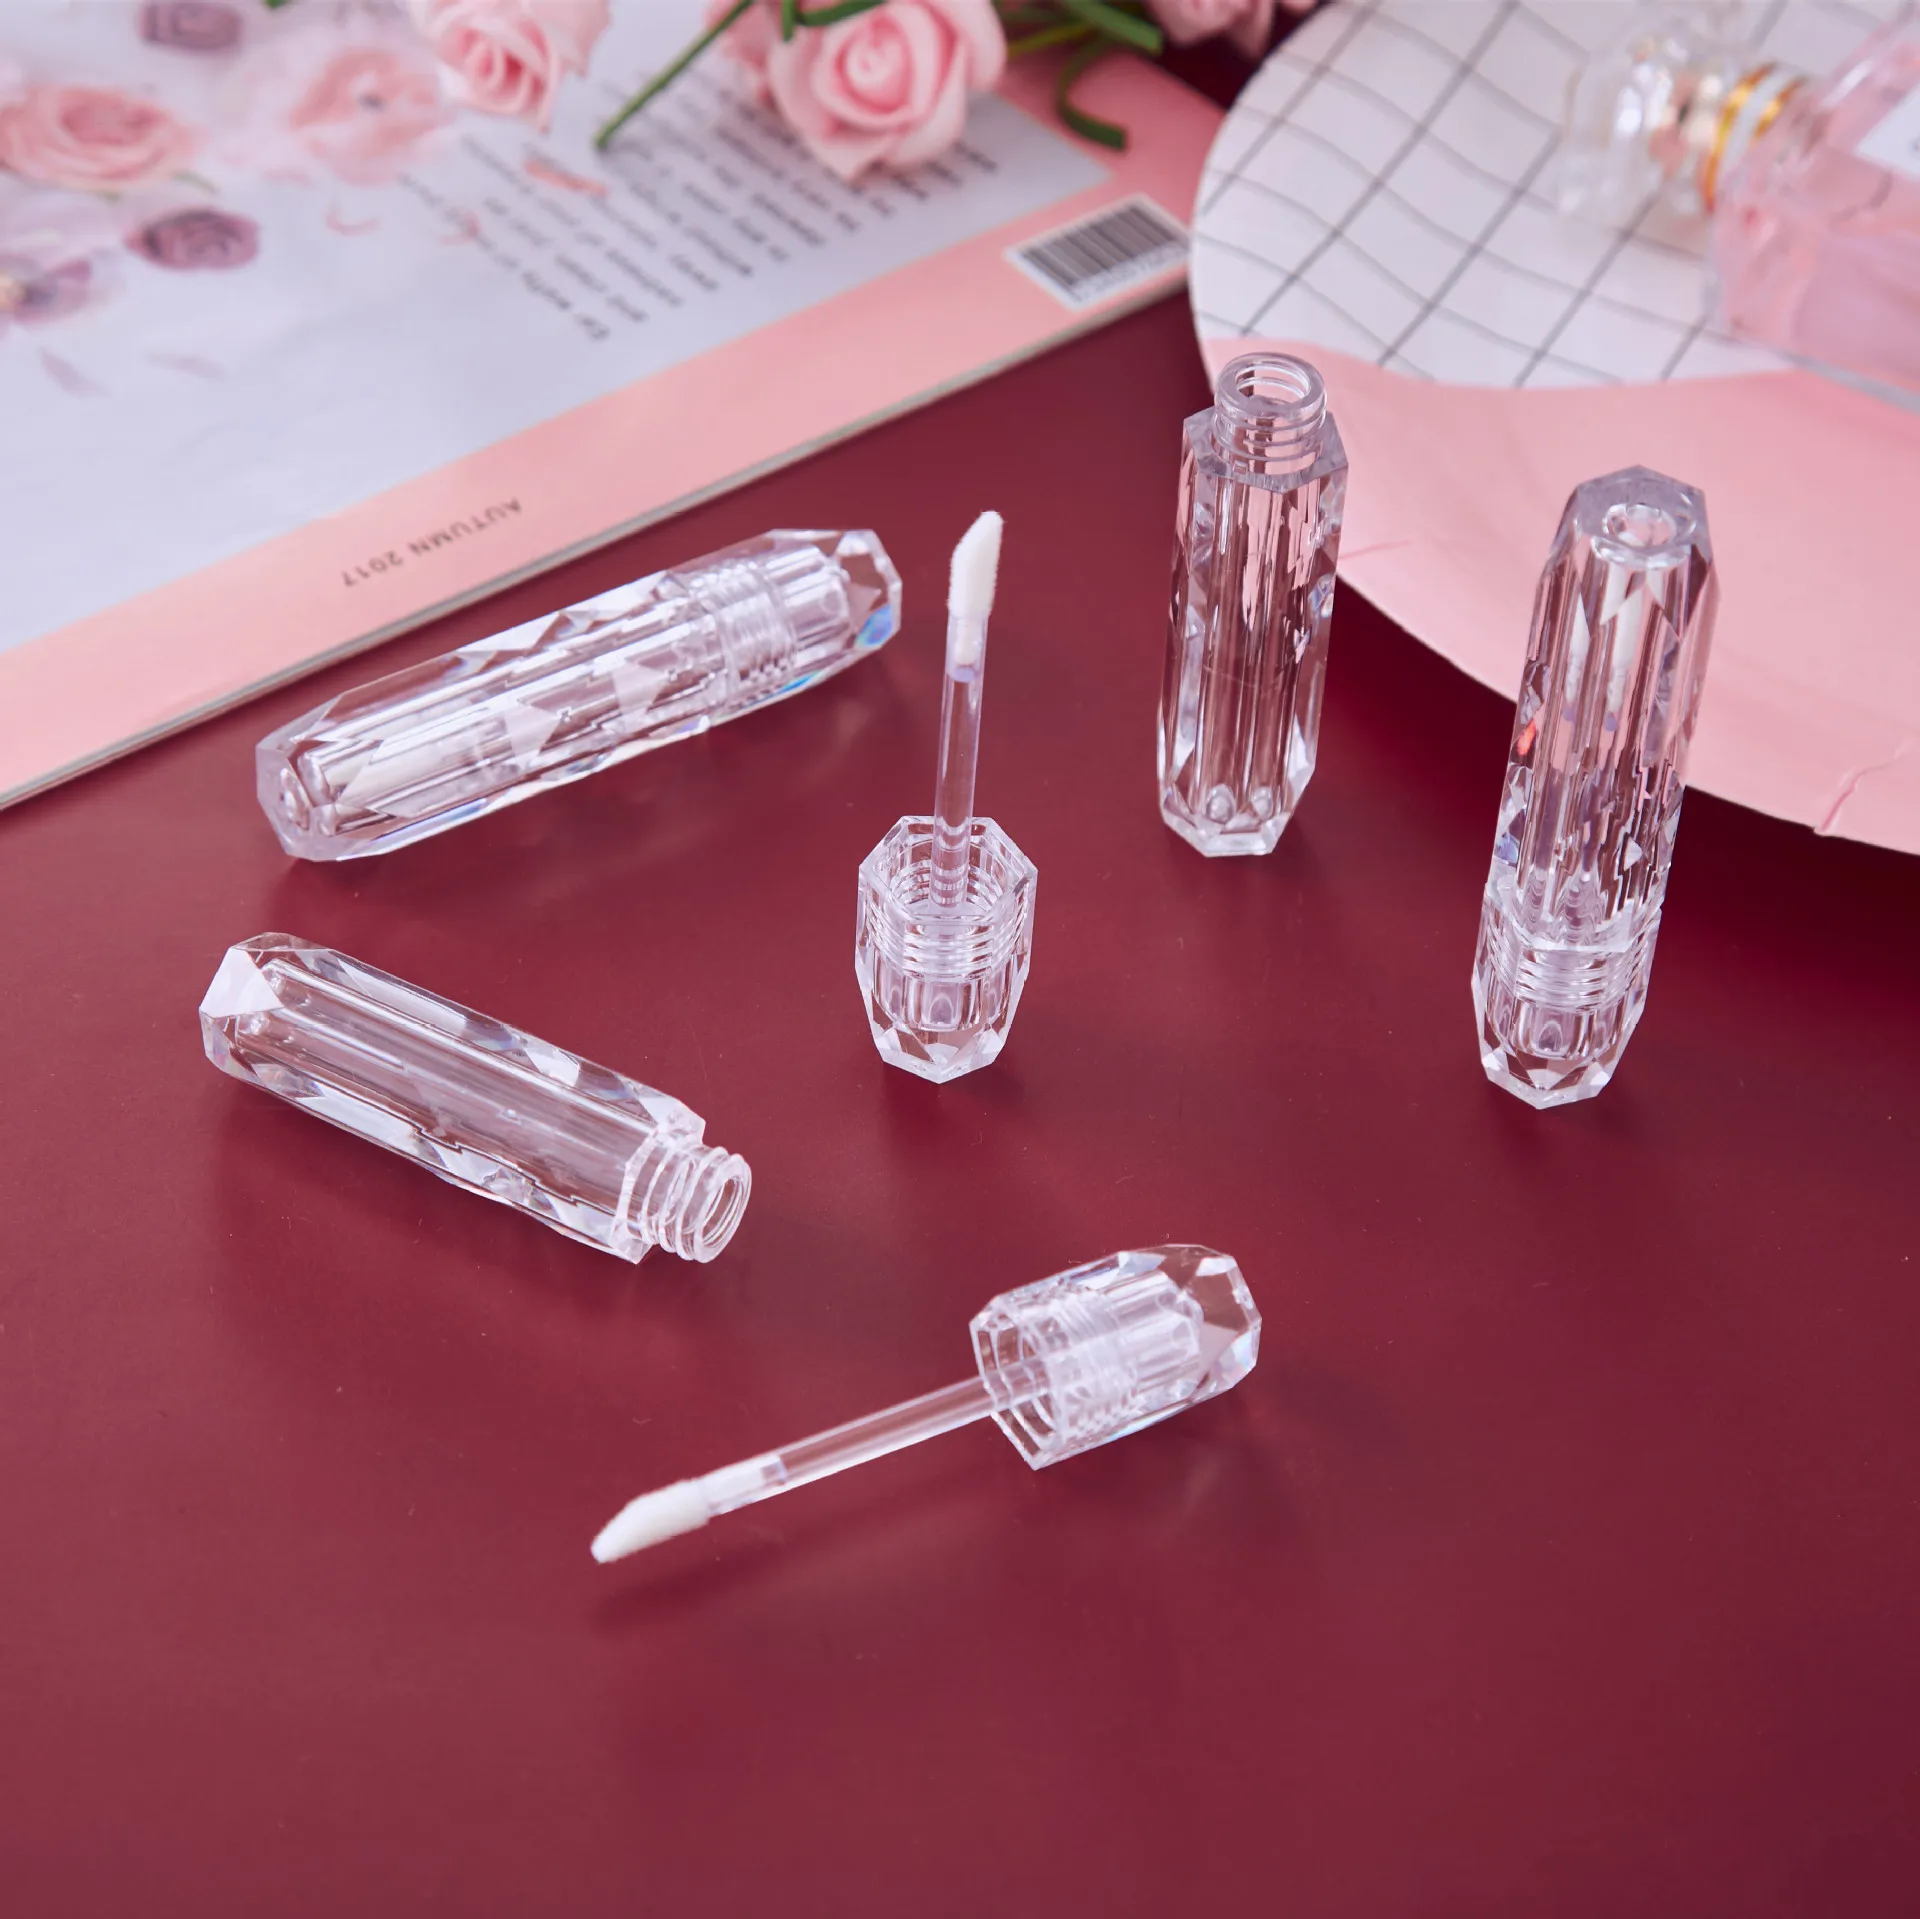 2.5ml Diamond Clear Plastic Lip Gloss Empty Tube Cosmetic LipGloss Container Packaging wholesale 57x37mm loose diamond display storage box clear gemstone organizer 40x40mm gem packaging box pendant display tray case